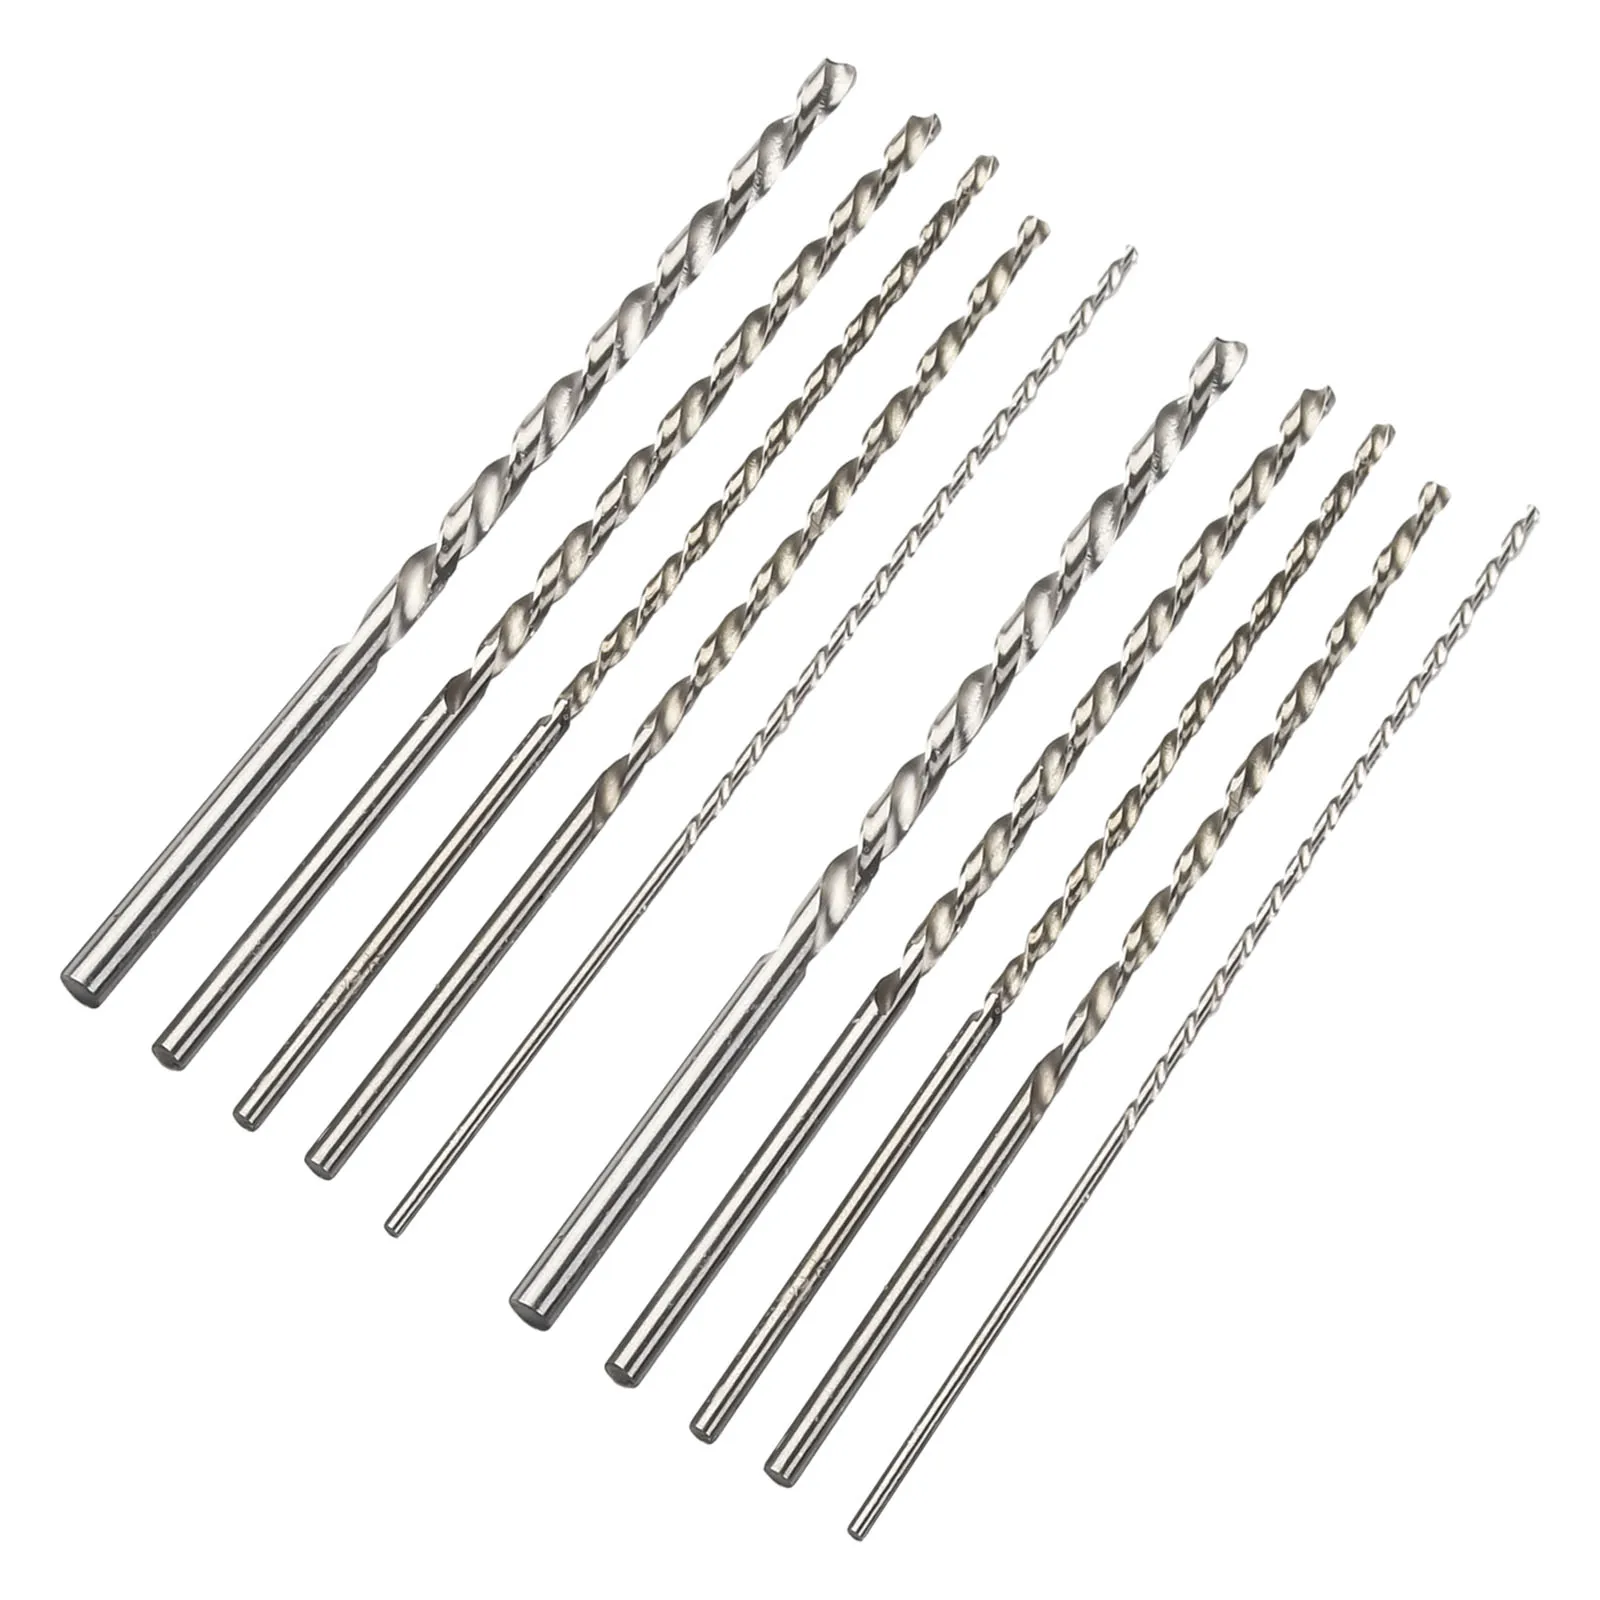 High Speed Steel Bit Set Extra Long HSS Straight Drill Bits Power Tools  For Metal Wood Glass 10Pcs 2mm 3mm 3.5mm 4mm 5mm 4pcs 3 12 4 12 4 20mm hss straight groove step drill bit set nitride twist drill wood metal hole cutter core drilling tools set